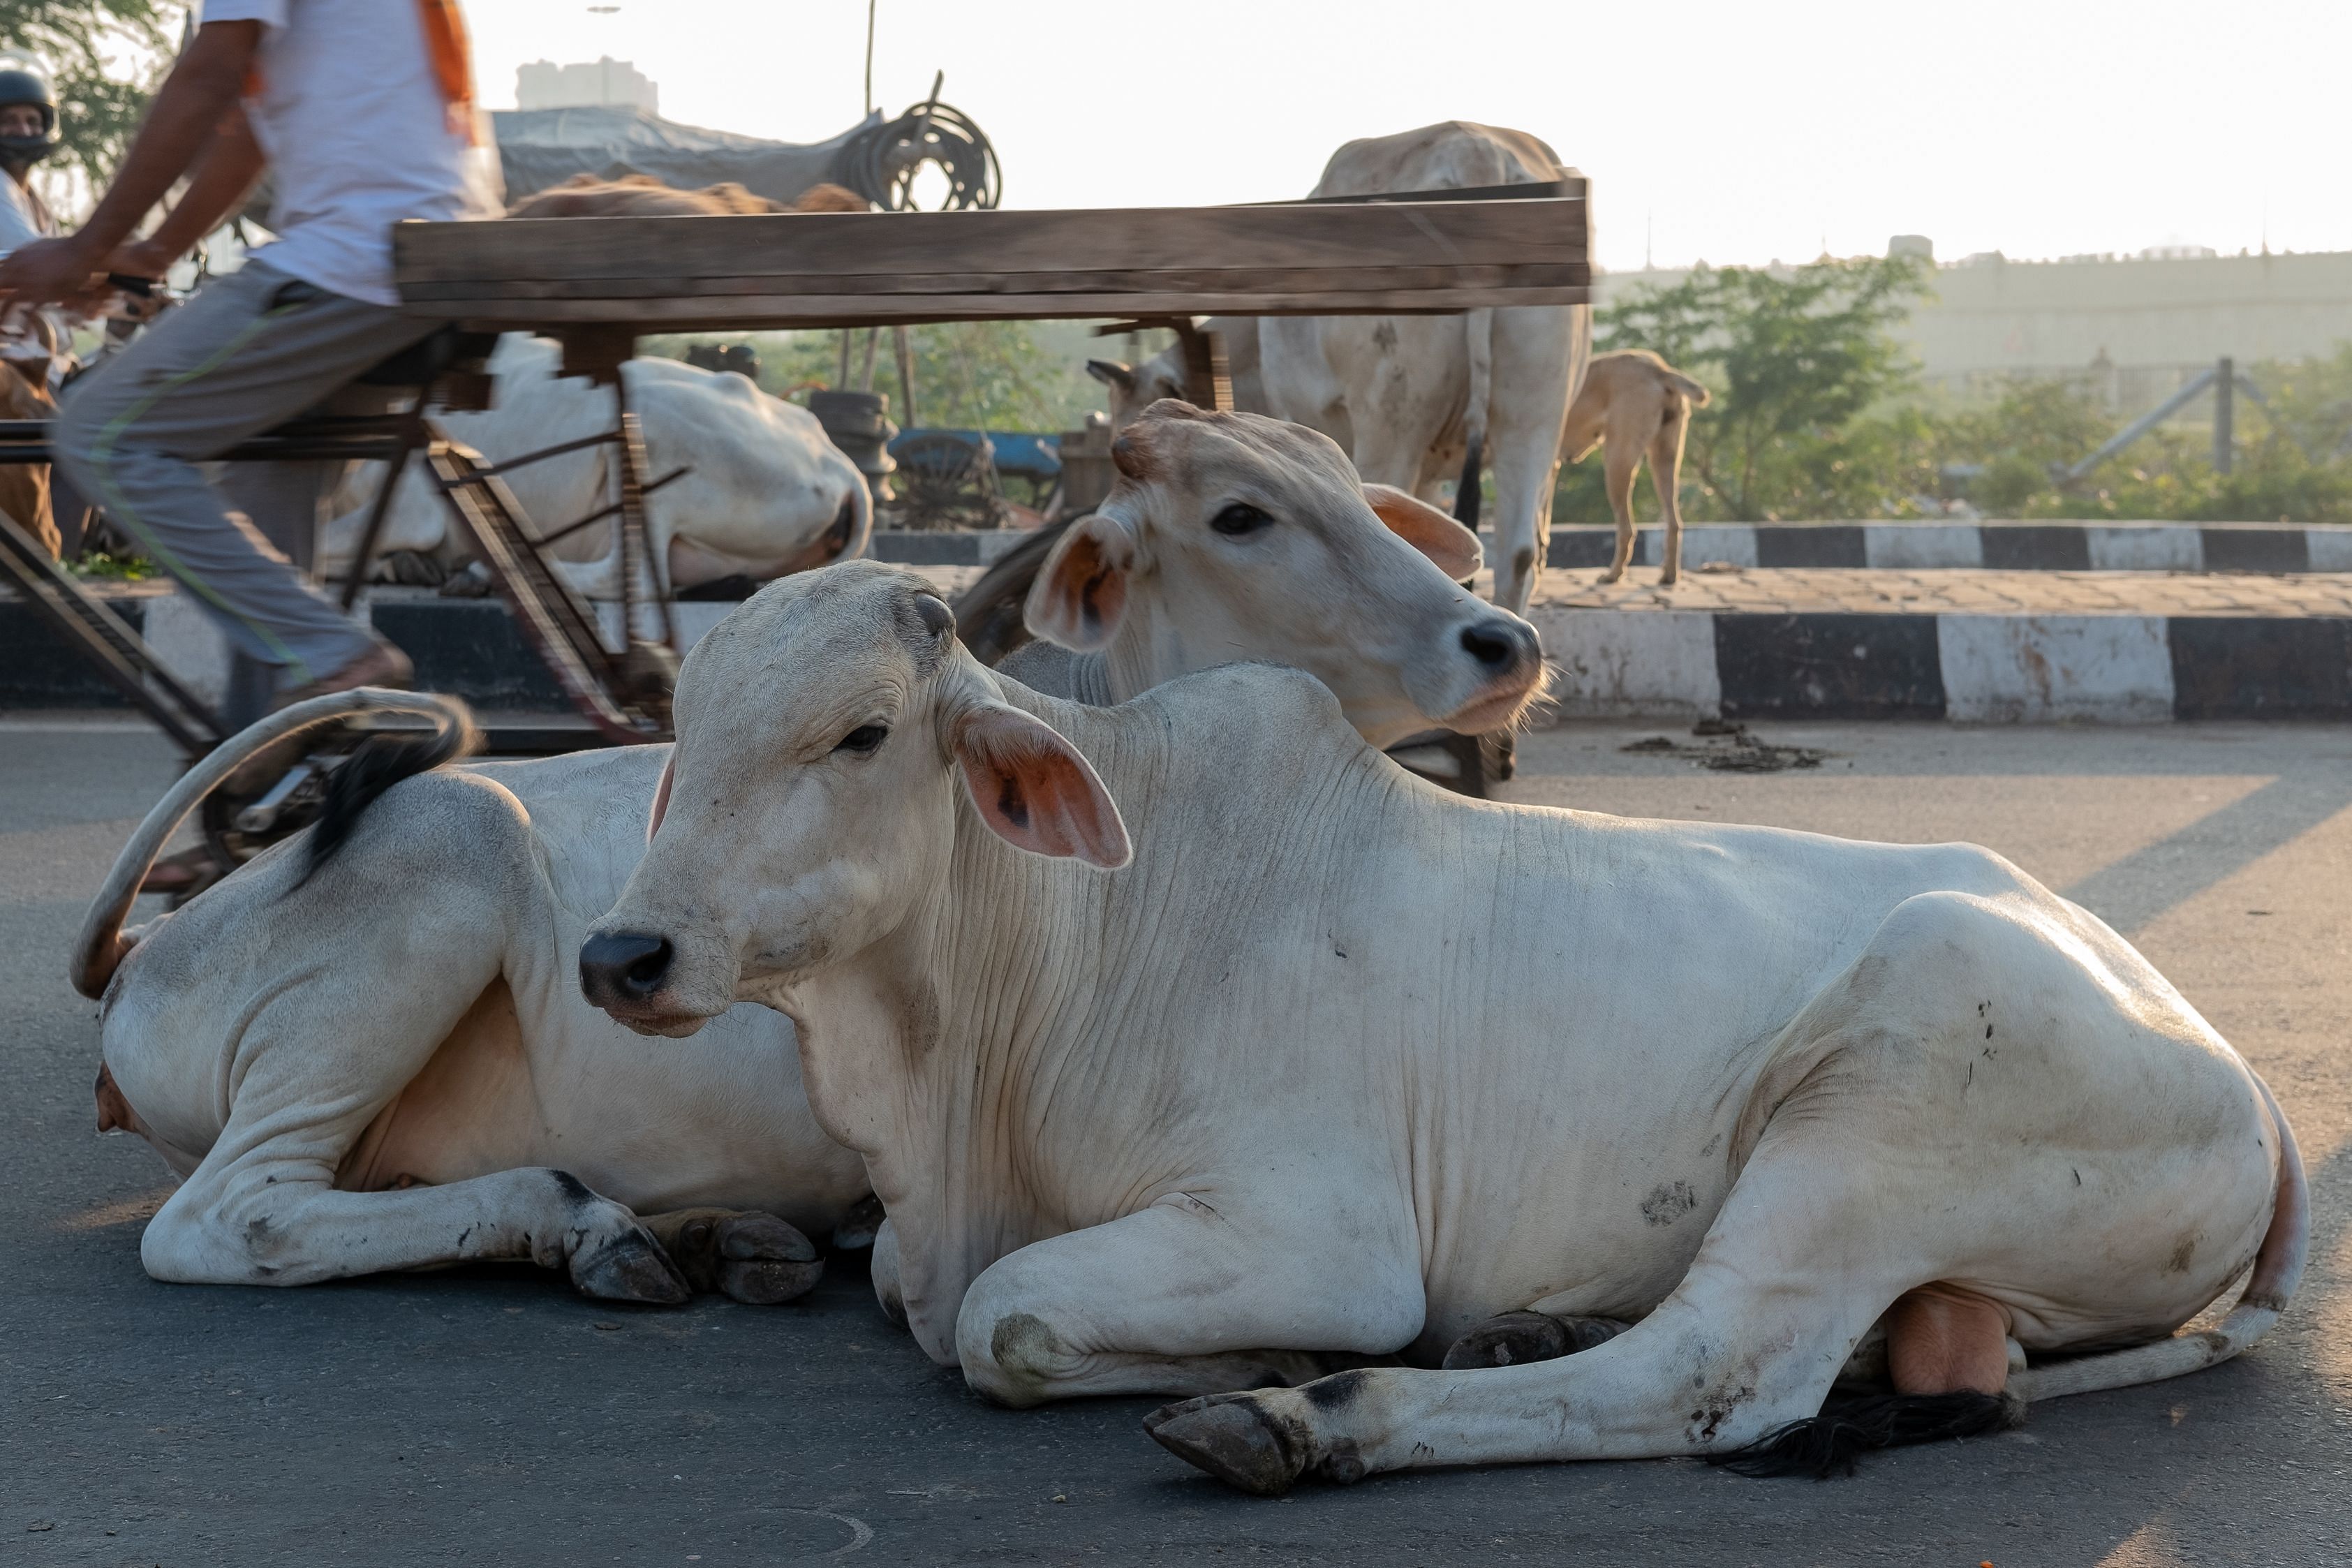 “Narayan claimed in his statement that he was transporting the six calves for farming purpose who were sent to a cow shelter. We are yet to verify his statement", Meena told DH. (Credit: AFP Photos)